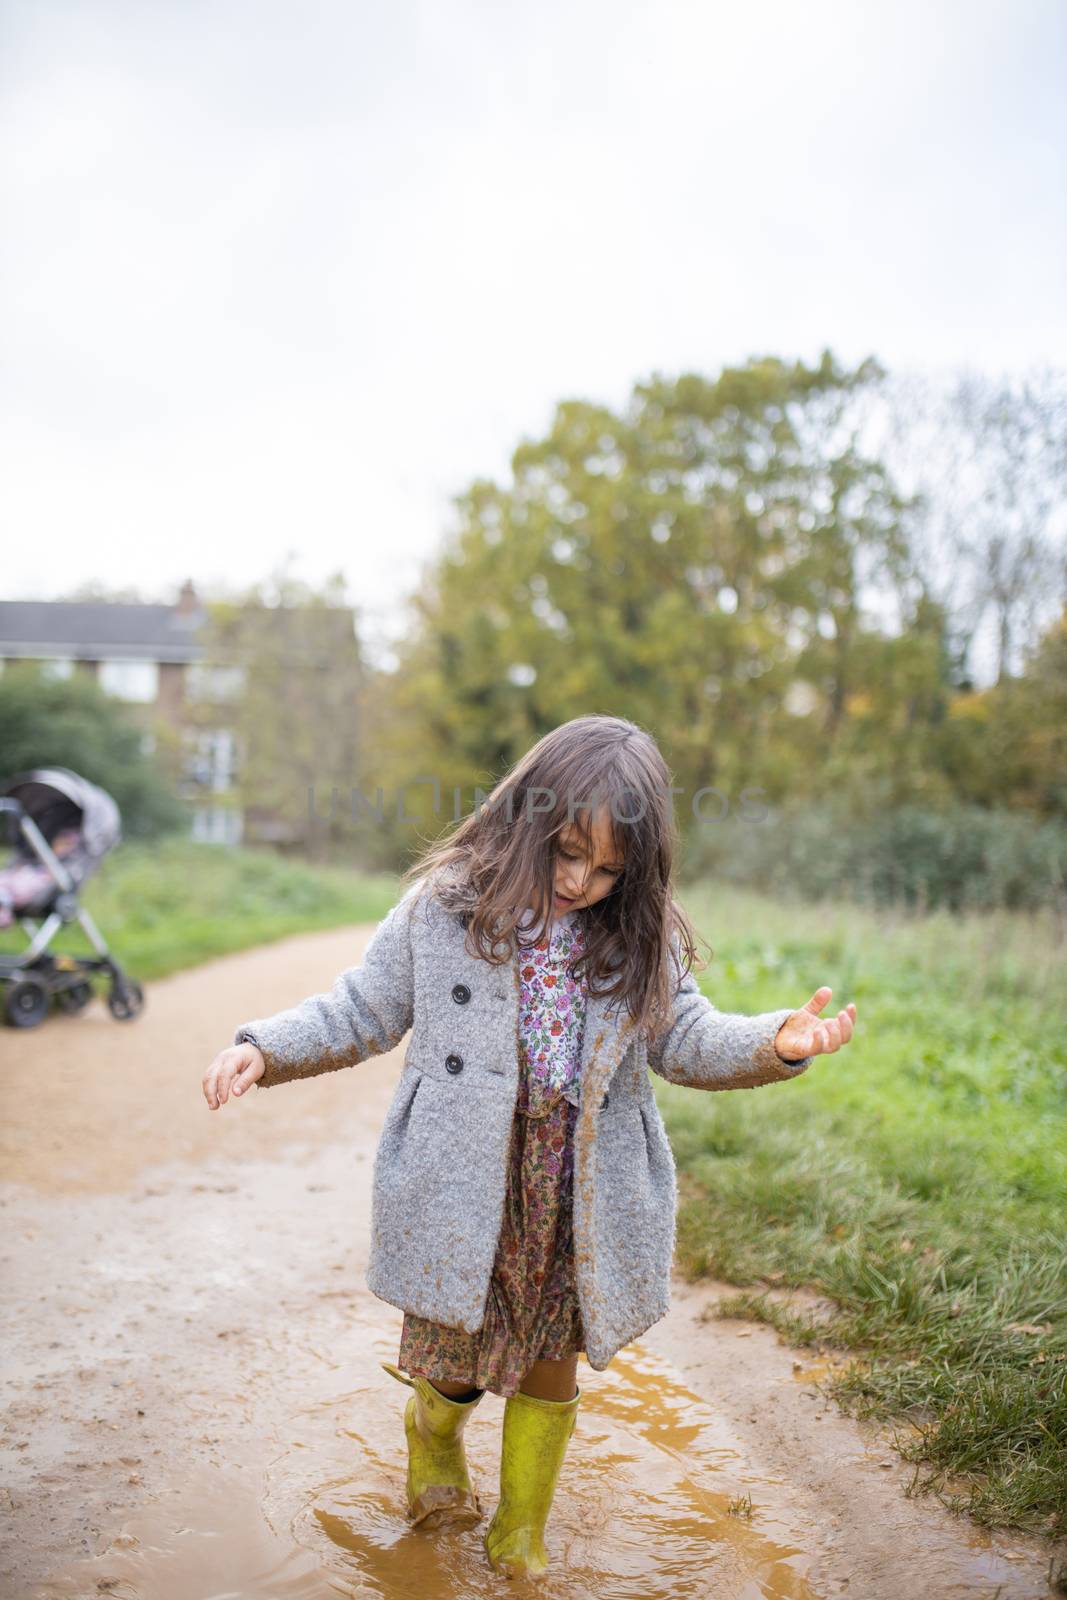 Happy little girl calmly walking through a muddy puddle by Kanelbulle